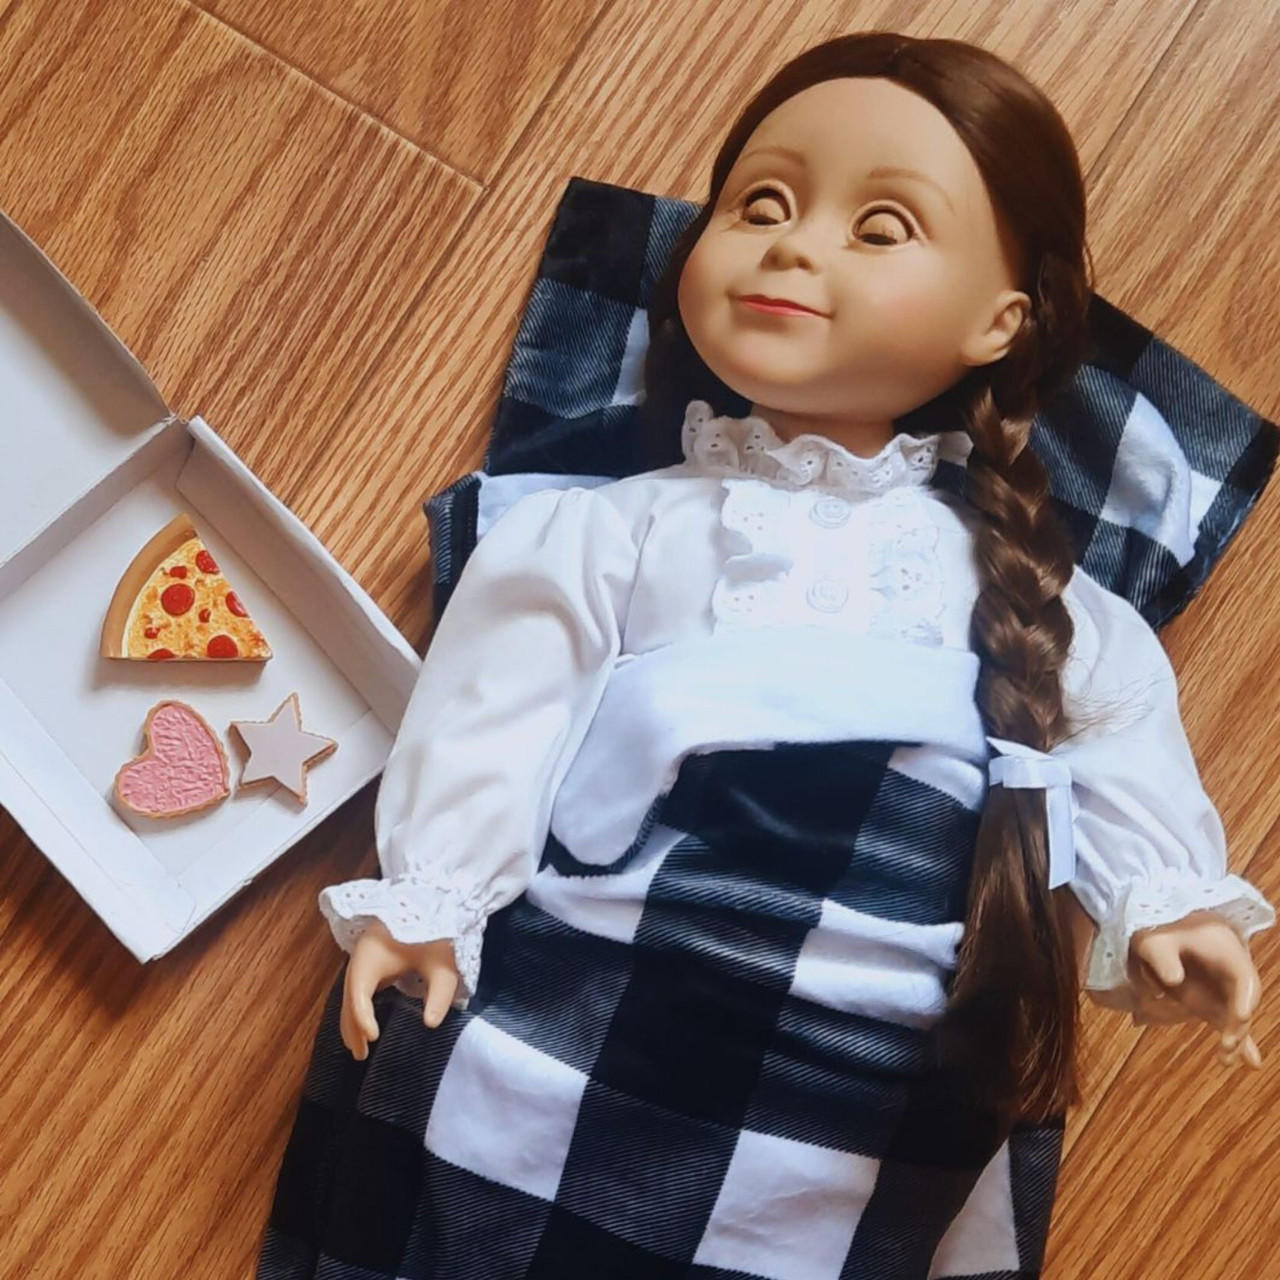 11Pc Sleepover and Pizza Party for 18 Dolls